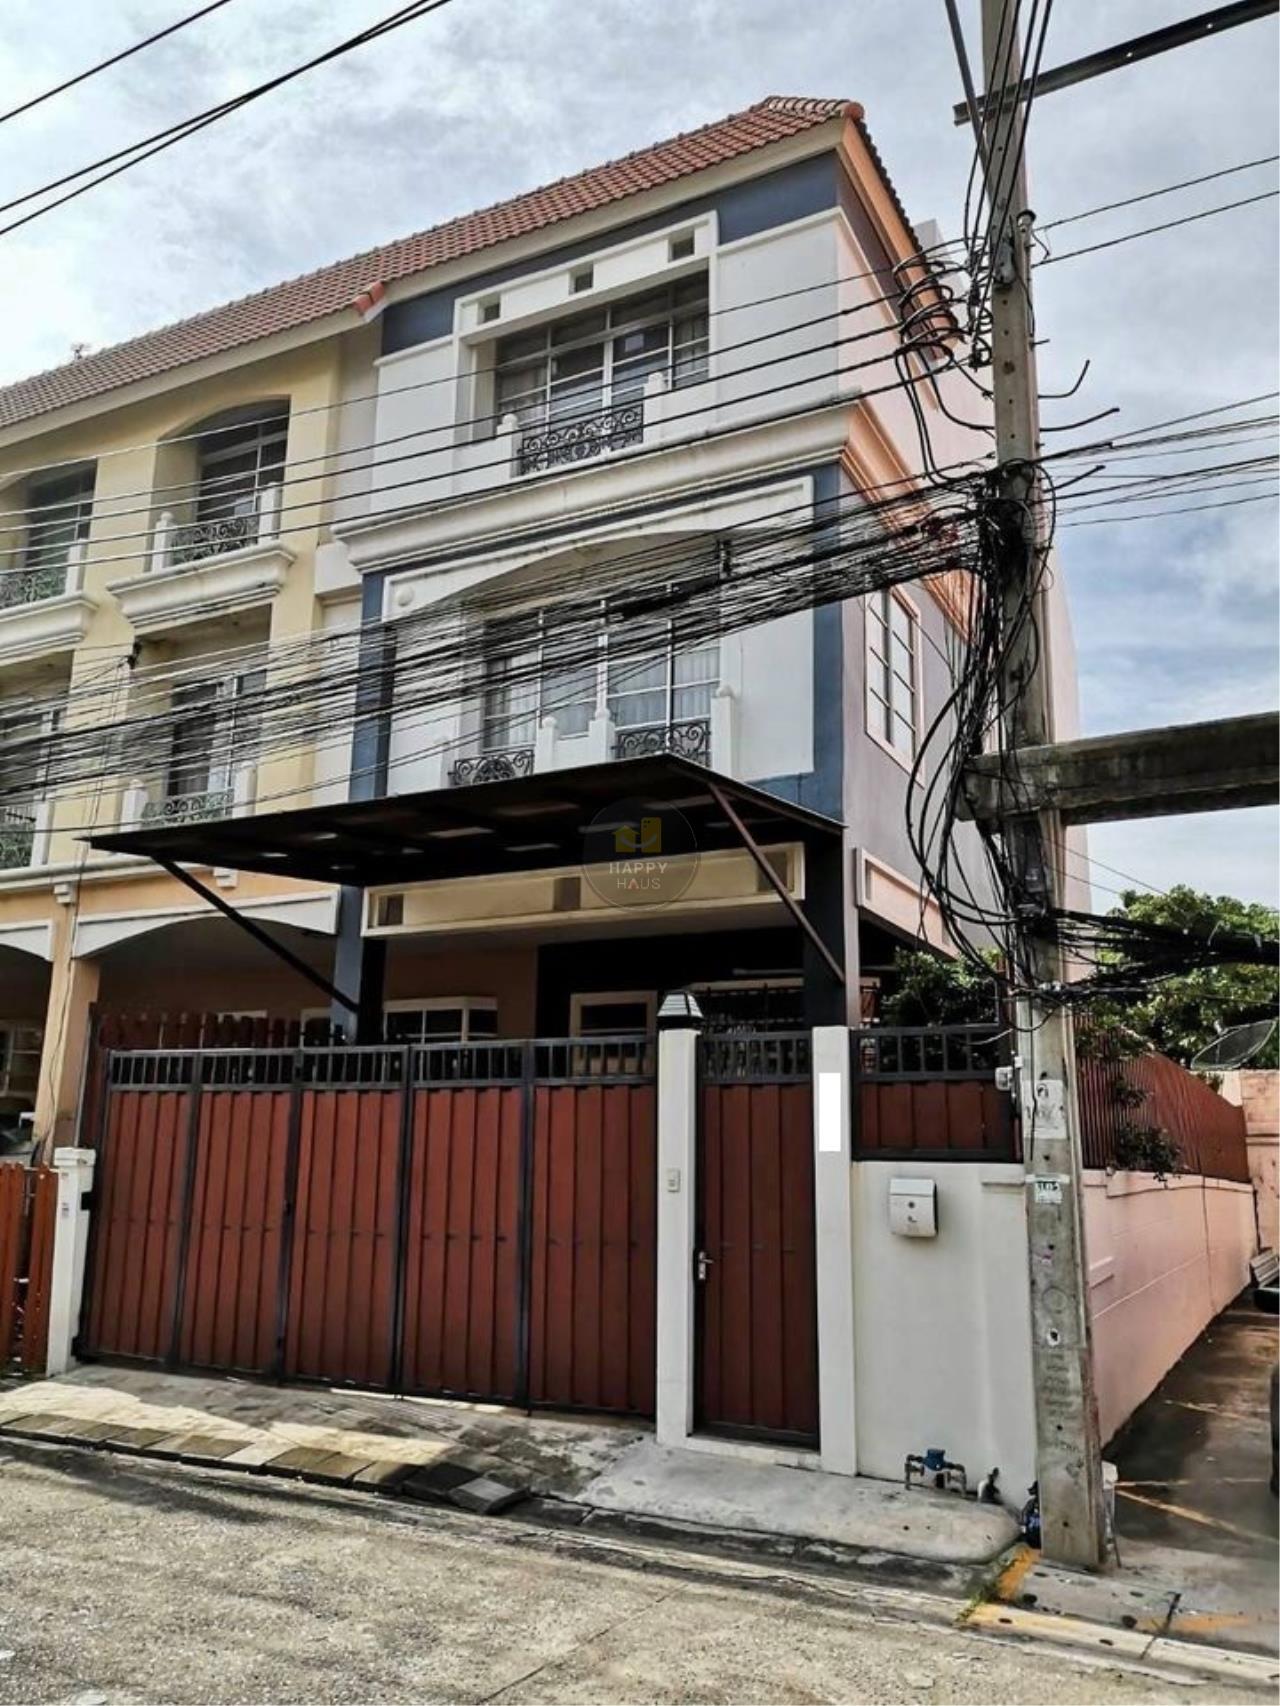 H598HH-Townhome for sale 3 floors Grand View On Nut 80 good location nice to live in On Nut area Only 300 meters from Te